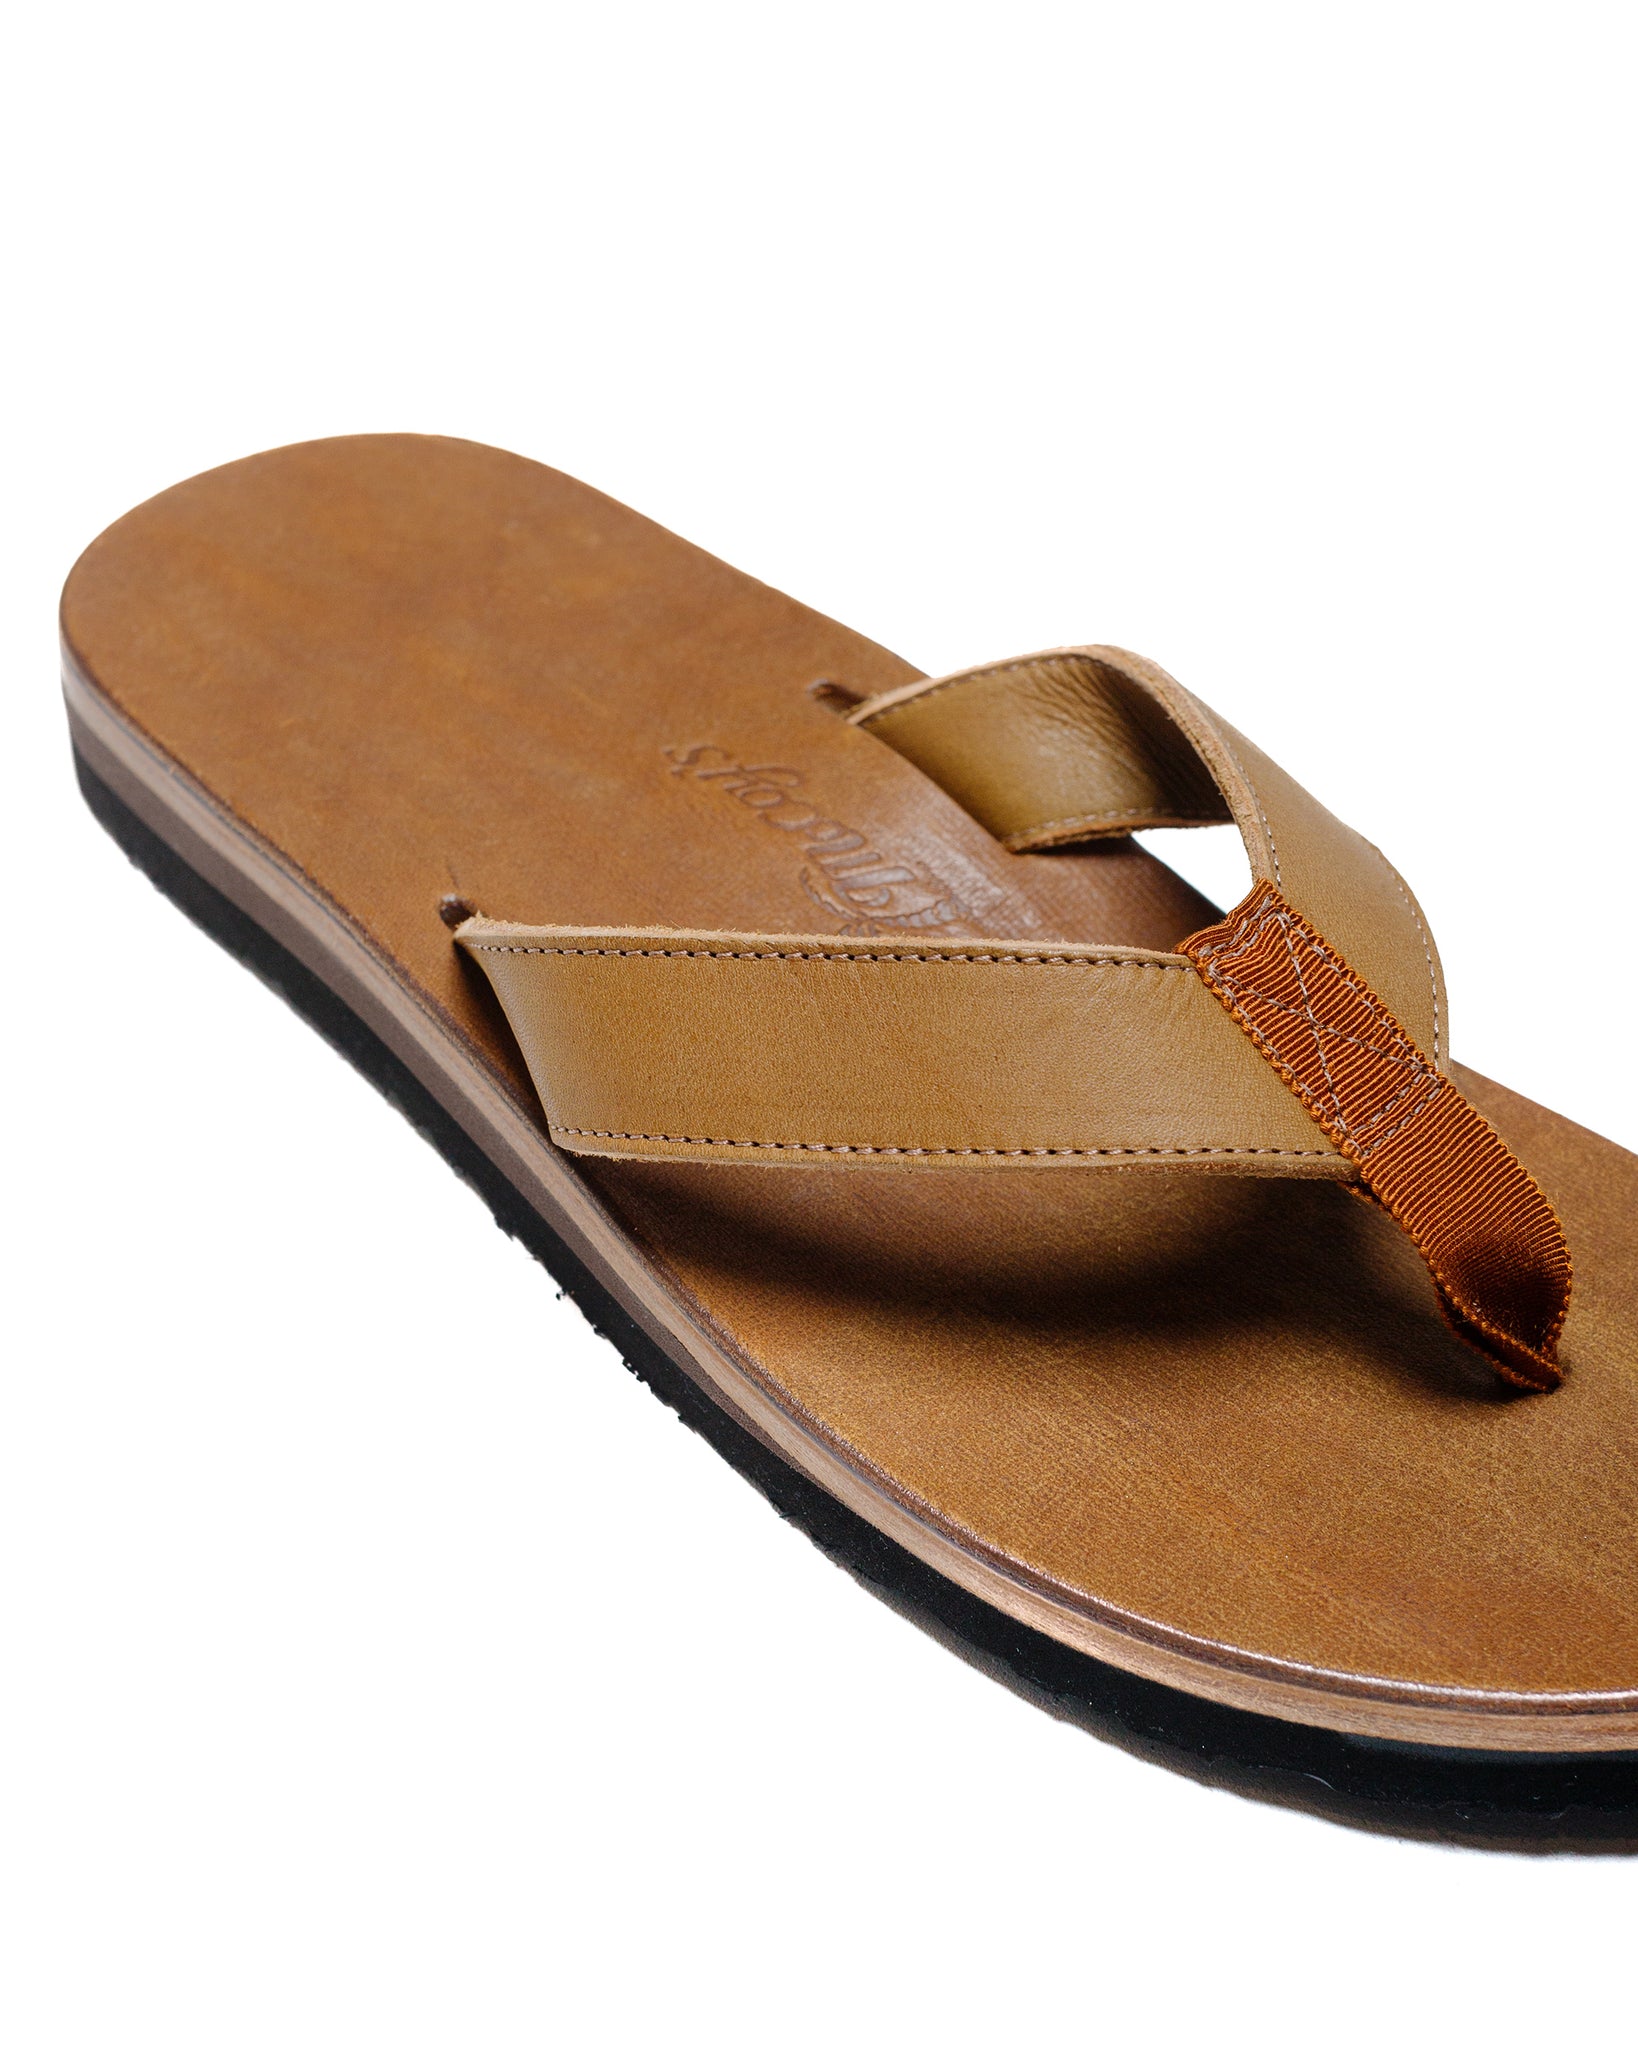 The Real McCoy's MA24011 Leather Arched Sandal Raw Sienna close